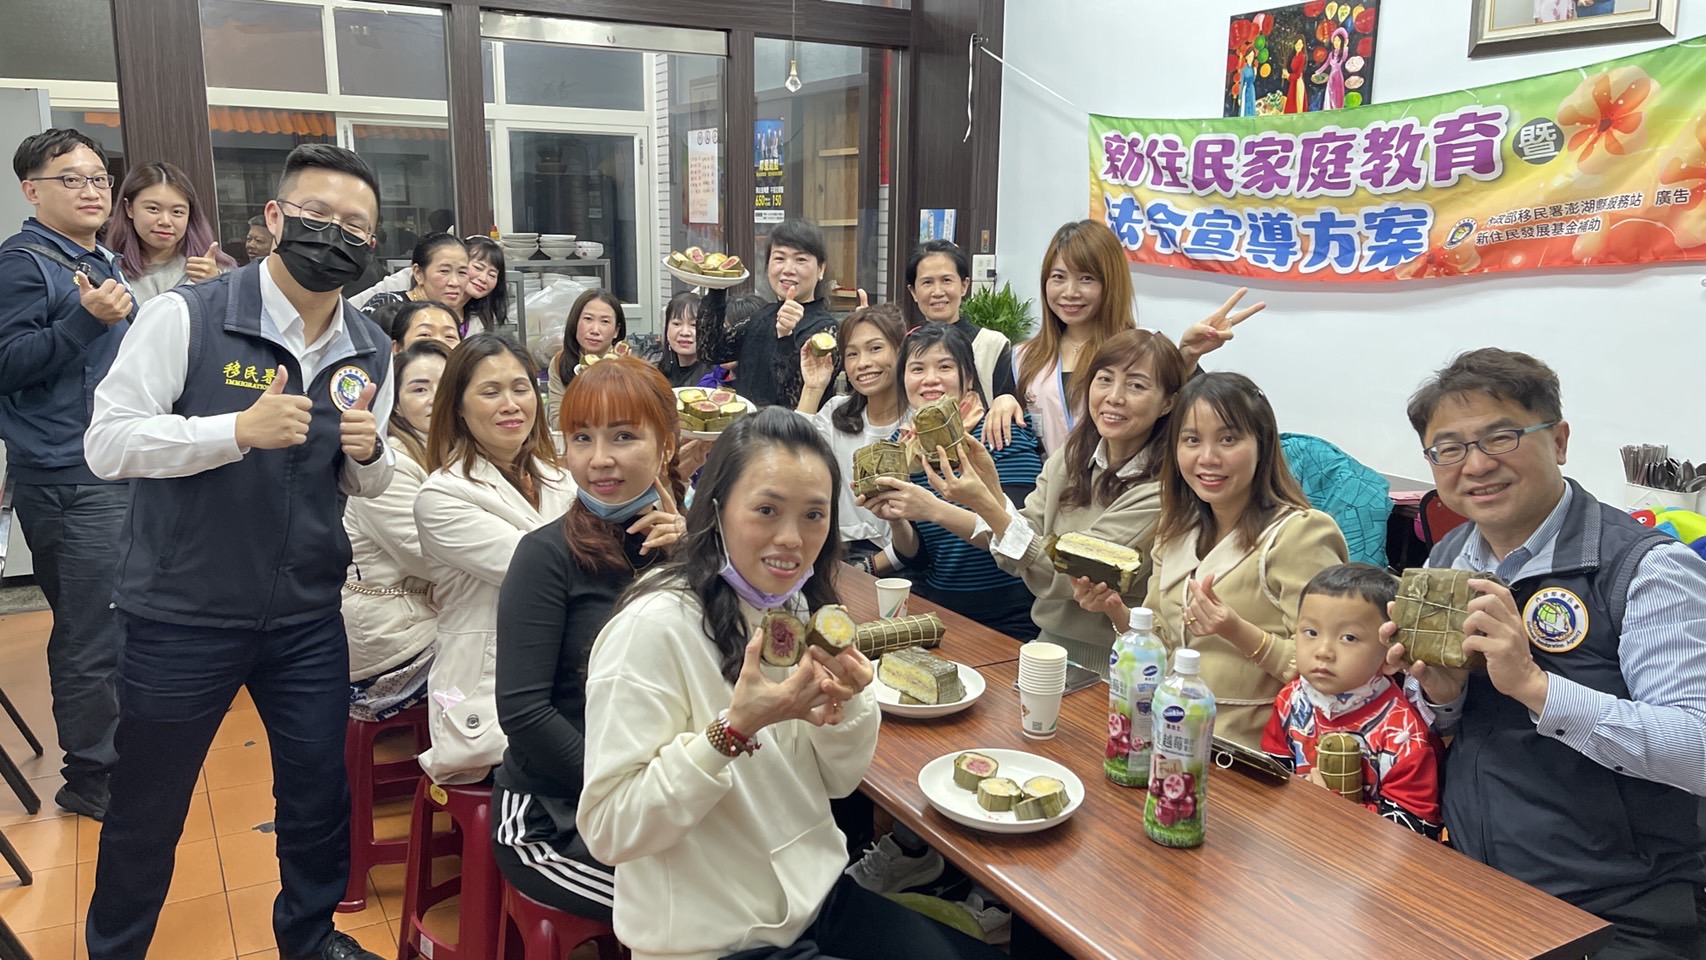 NIA to Invite New Immigrants to Experience Vietnamese Rice Dumplings Picture reproduced from Penghu County Service Center